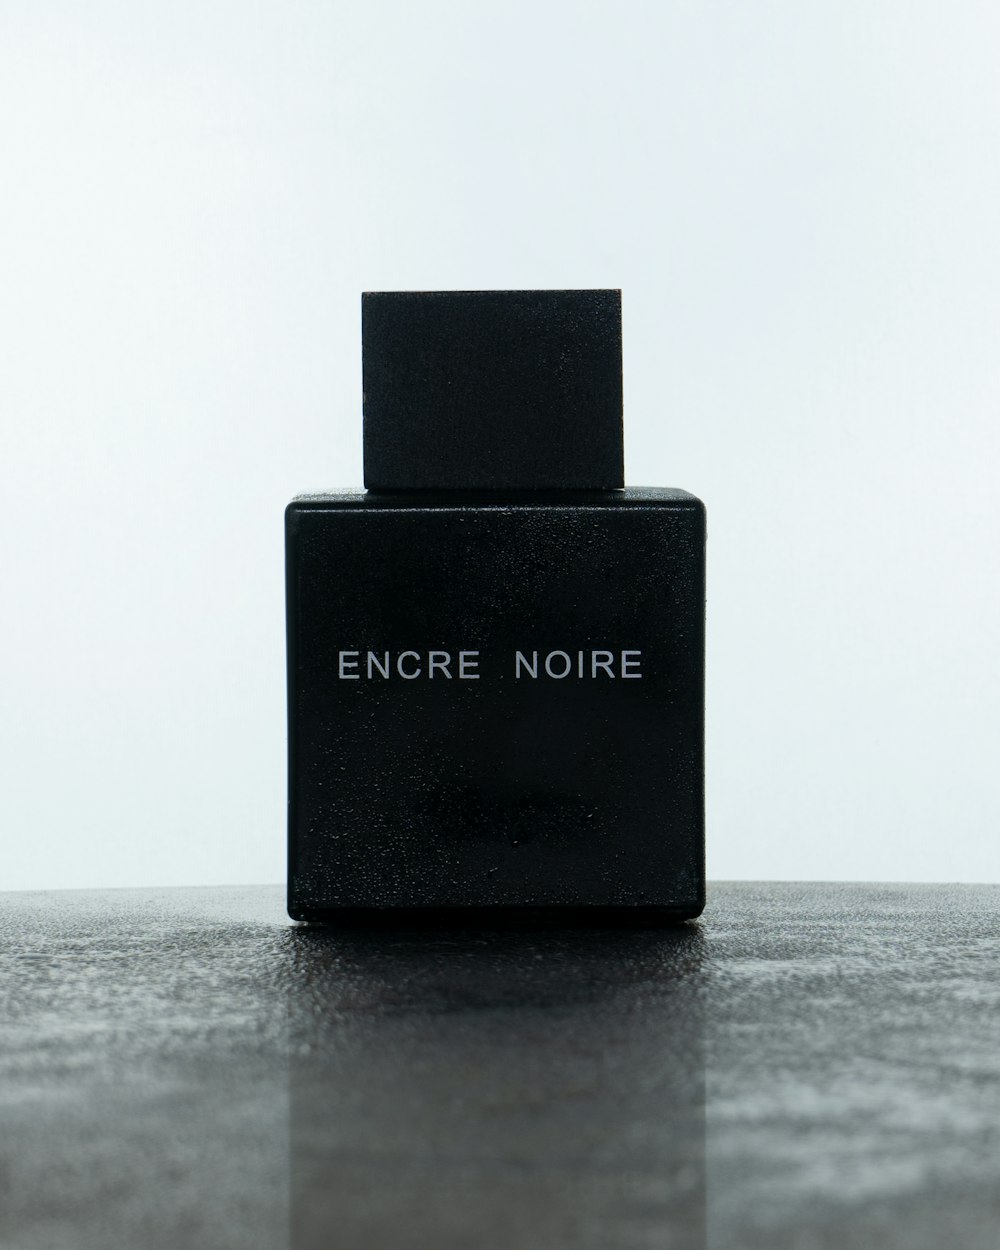 a black rectangular object with a white label on it